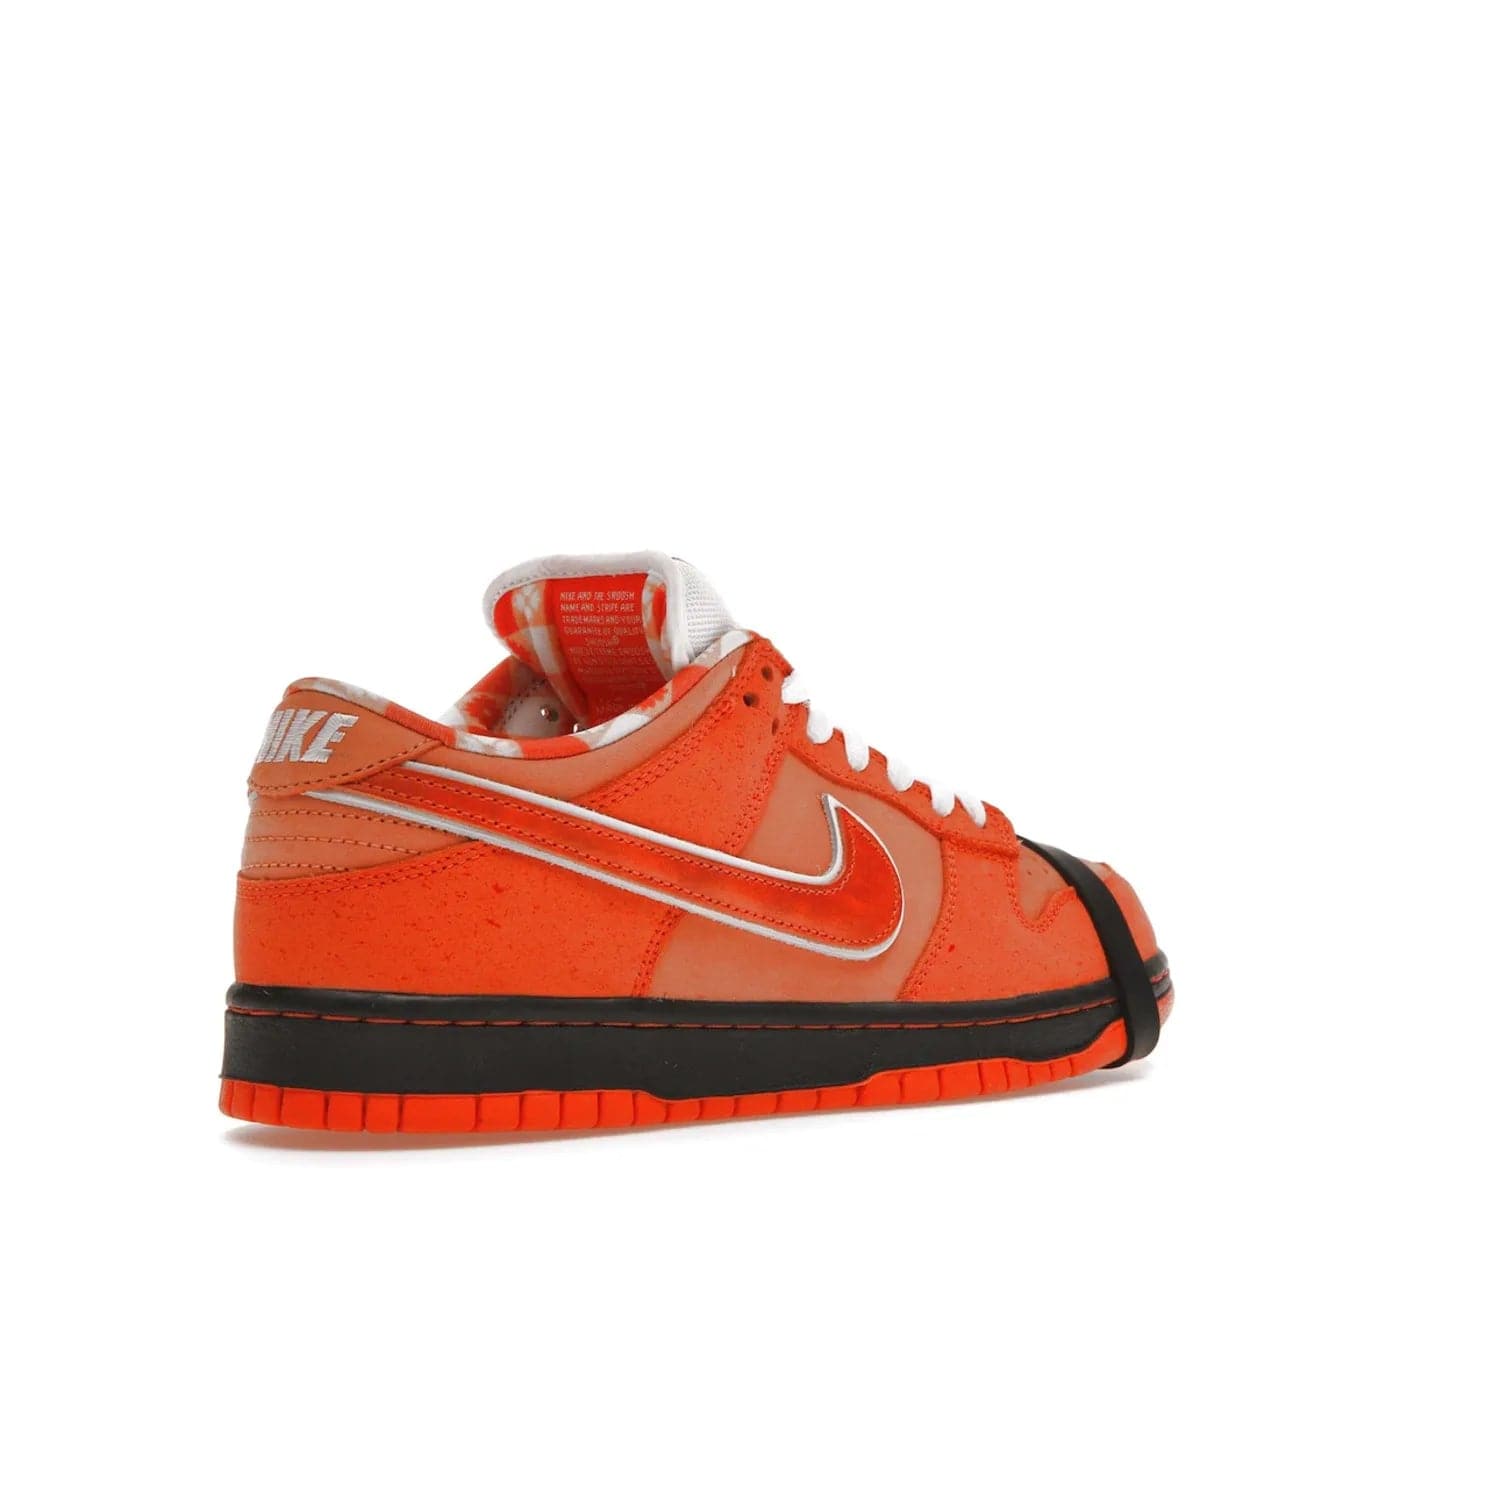 Nike SB Dunk Low Concepts Orange Lobster - Image 33 - Only at www.BallersClubKickz.com - Make a statement with the Nike SB Dunk Low Concepts Orange Lobster. Variety of orange hues, nubuck upper, bib-inspired lining & rubber outsole create bold look & comfortable blend of style. Available December 20th, 2022.